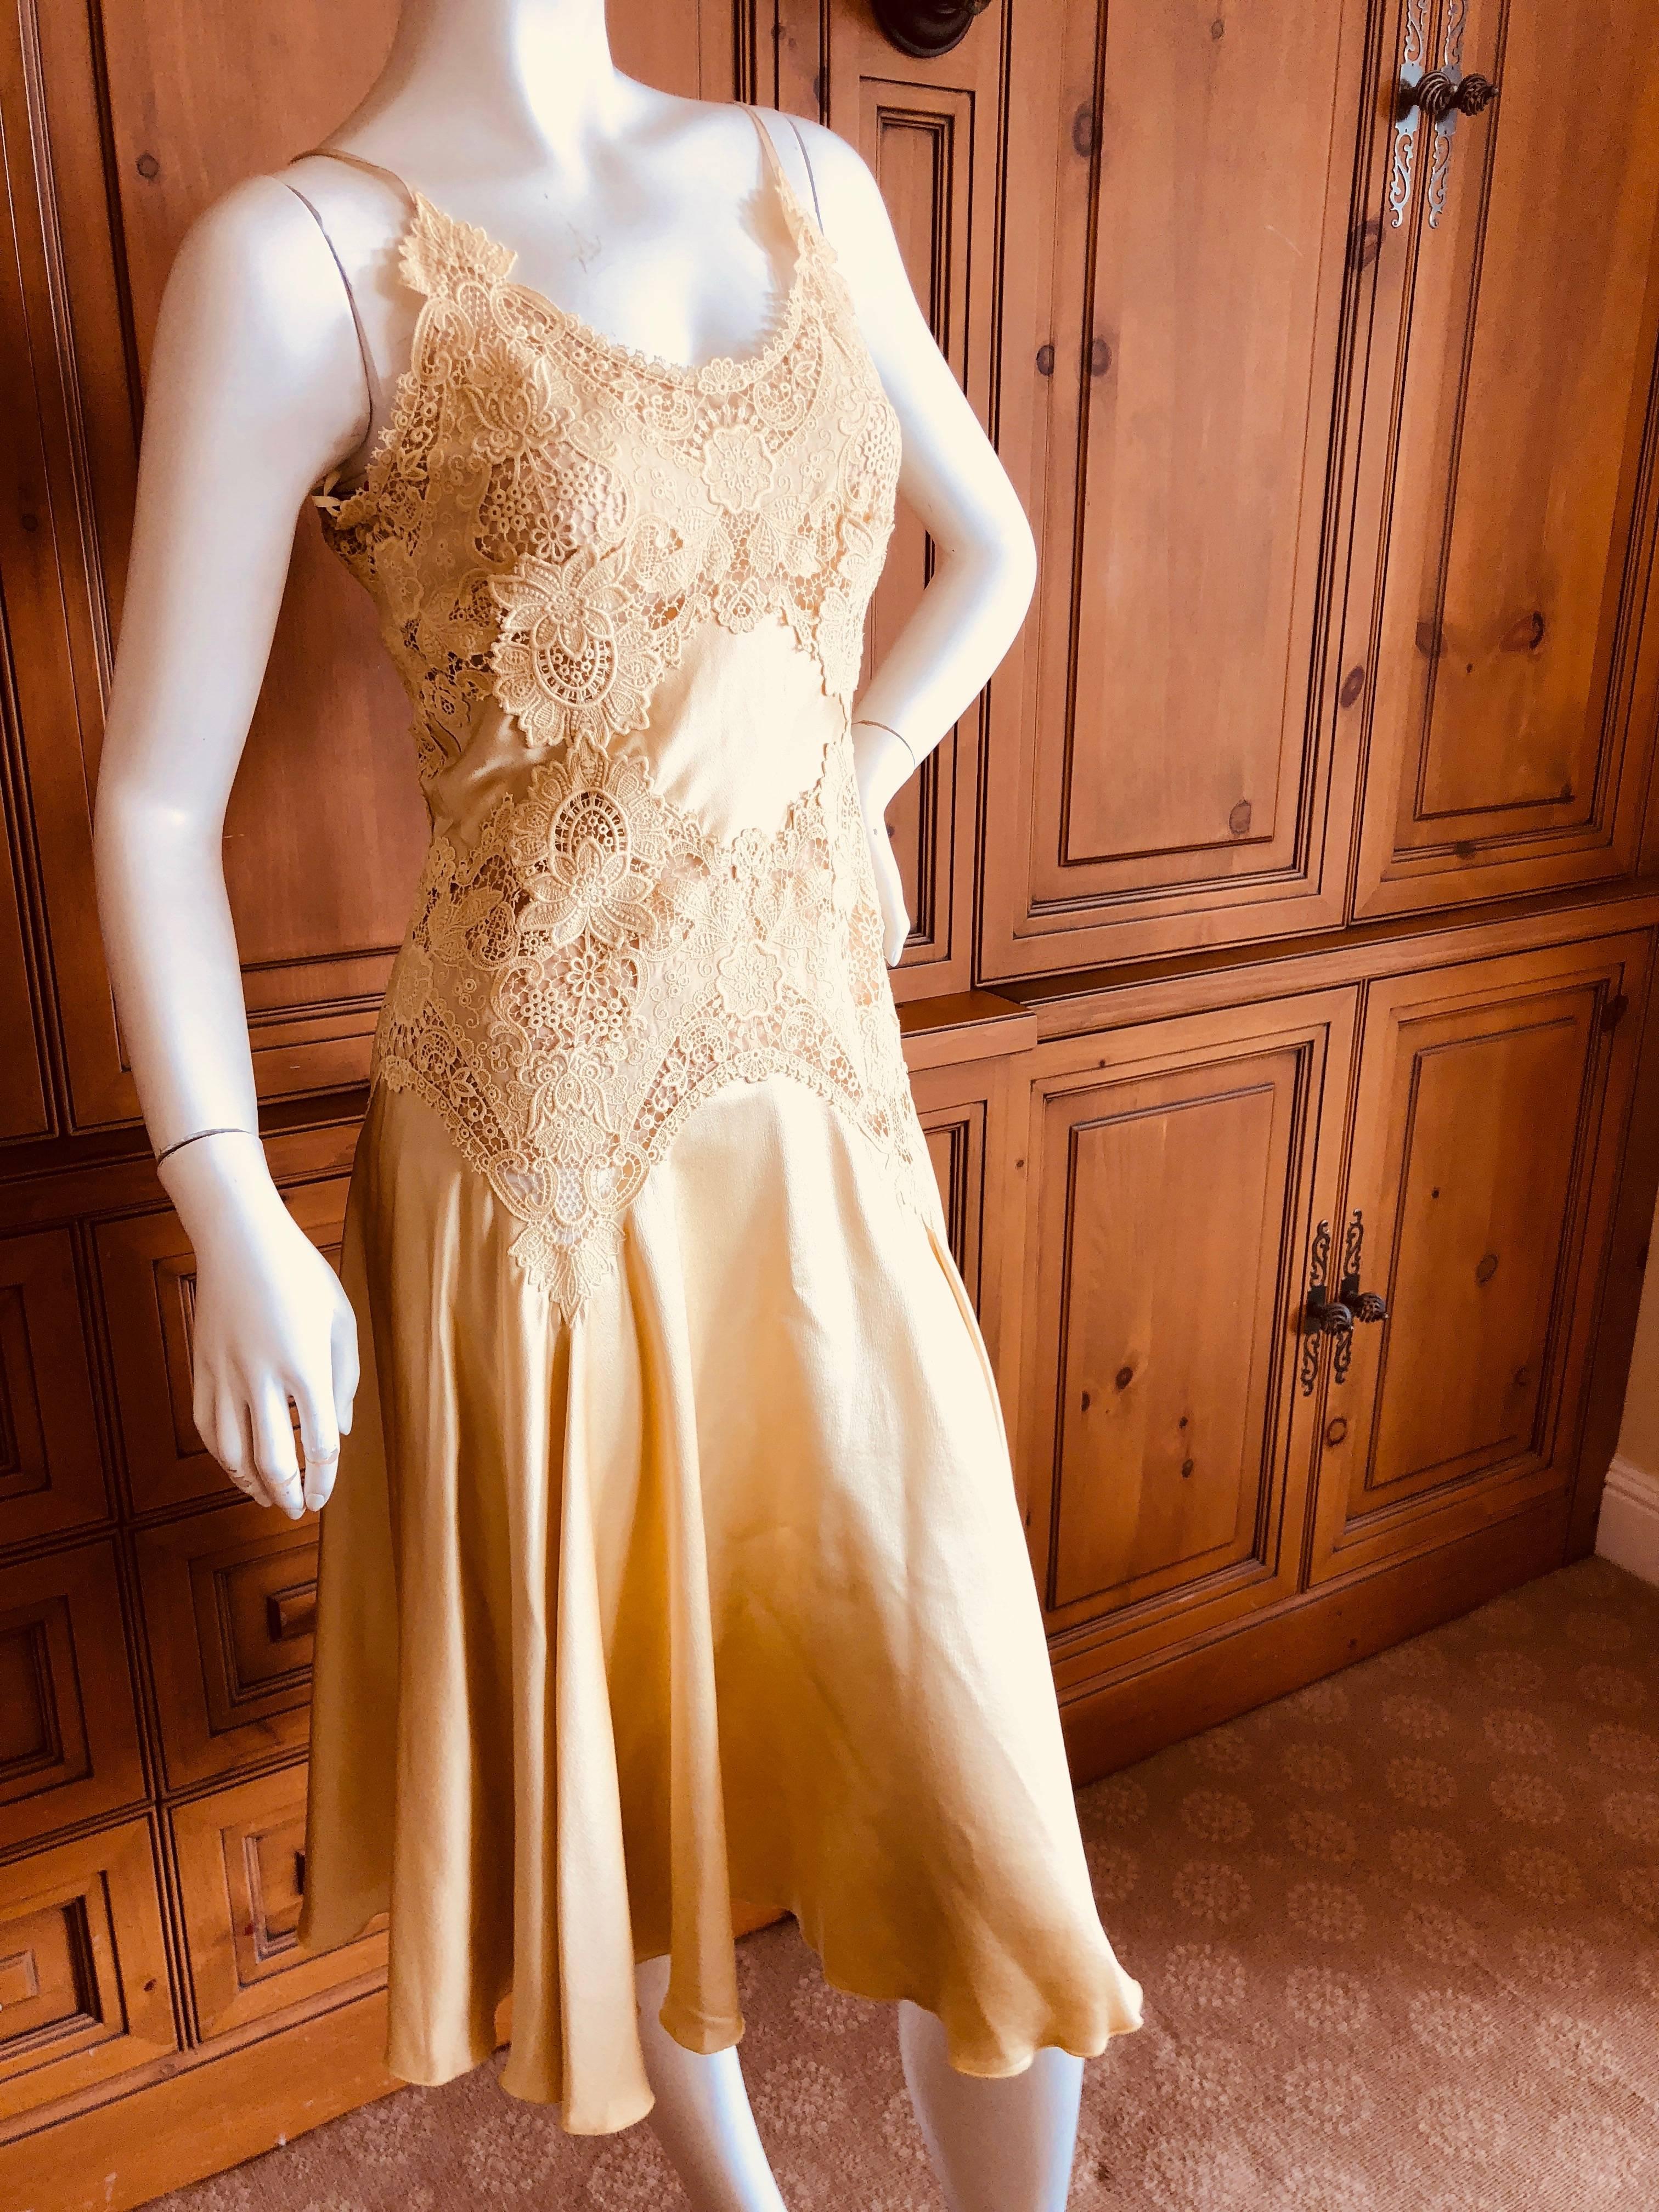 Alexander McQueen Romantic Butter Yellow Guipure Lace Dress 2004 In Excellent Condition For Sale In Cloverdale, CA